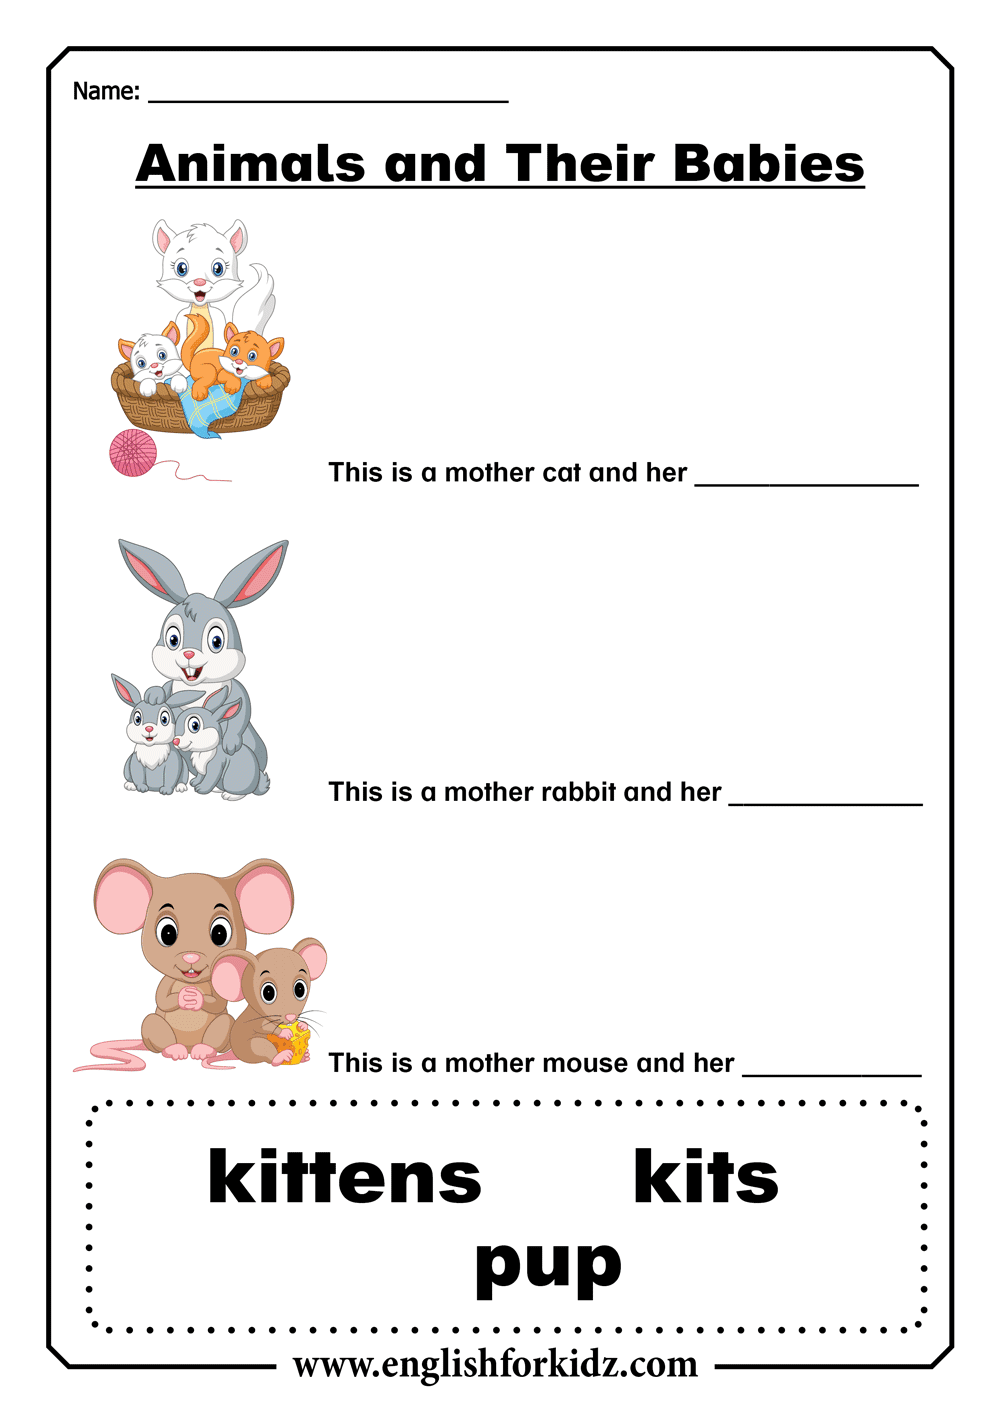 English for Kids Step by Step: Animal Babies Worksheets